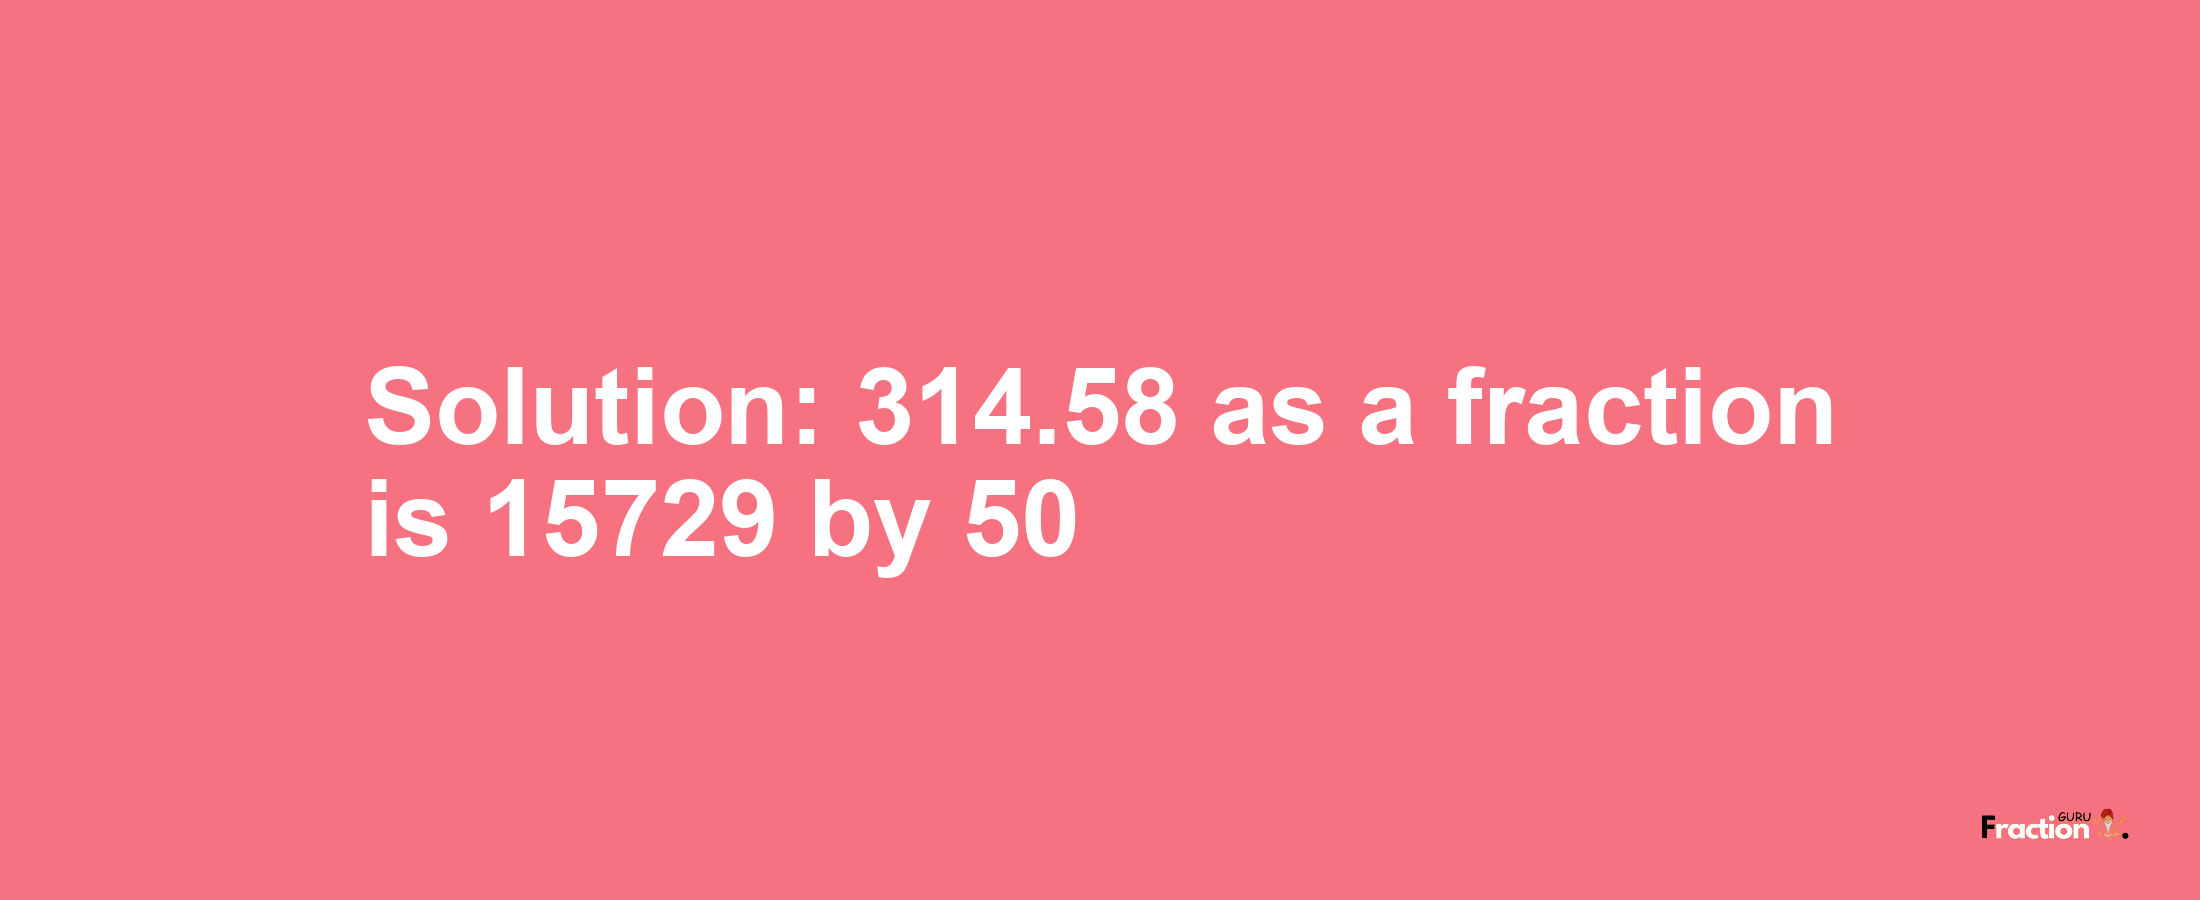 Solution:314.58 as a fraction is 15729/50